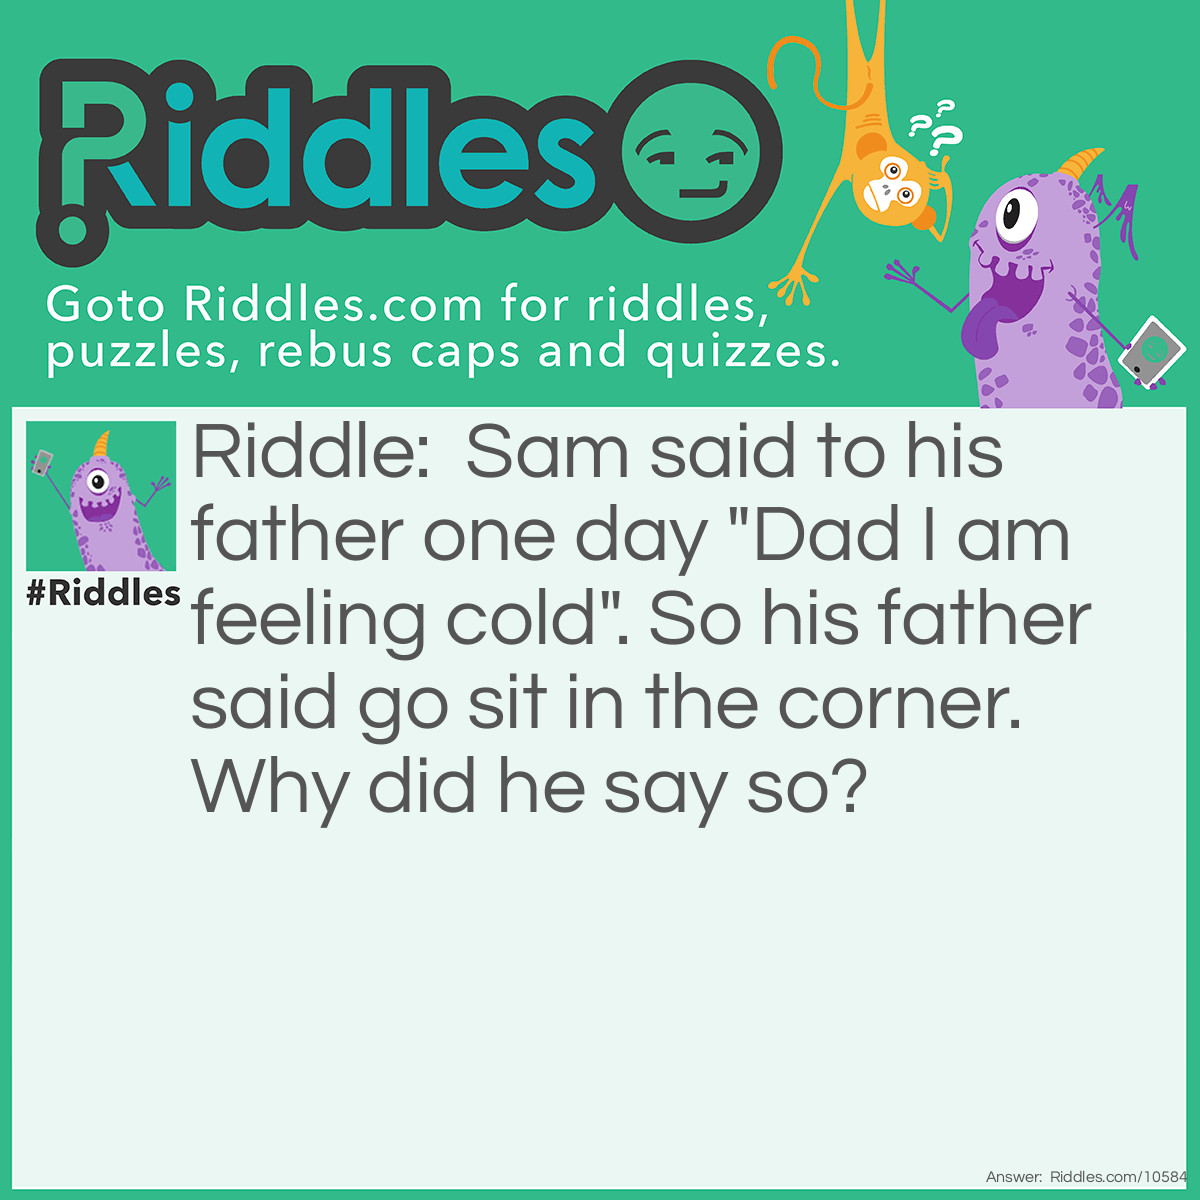 Riddle: Sam said to his father one day "Dad I am feeling cold". So his father said go sit in the corner. Why did he say so? Answer: It's because It's 90 degrees [You'll get it]